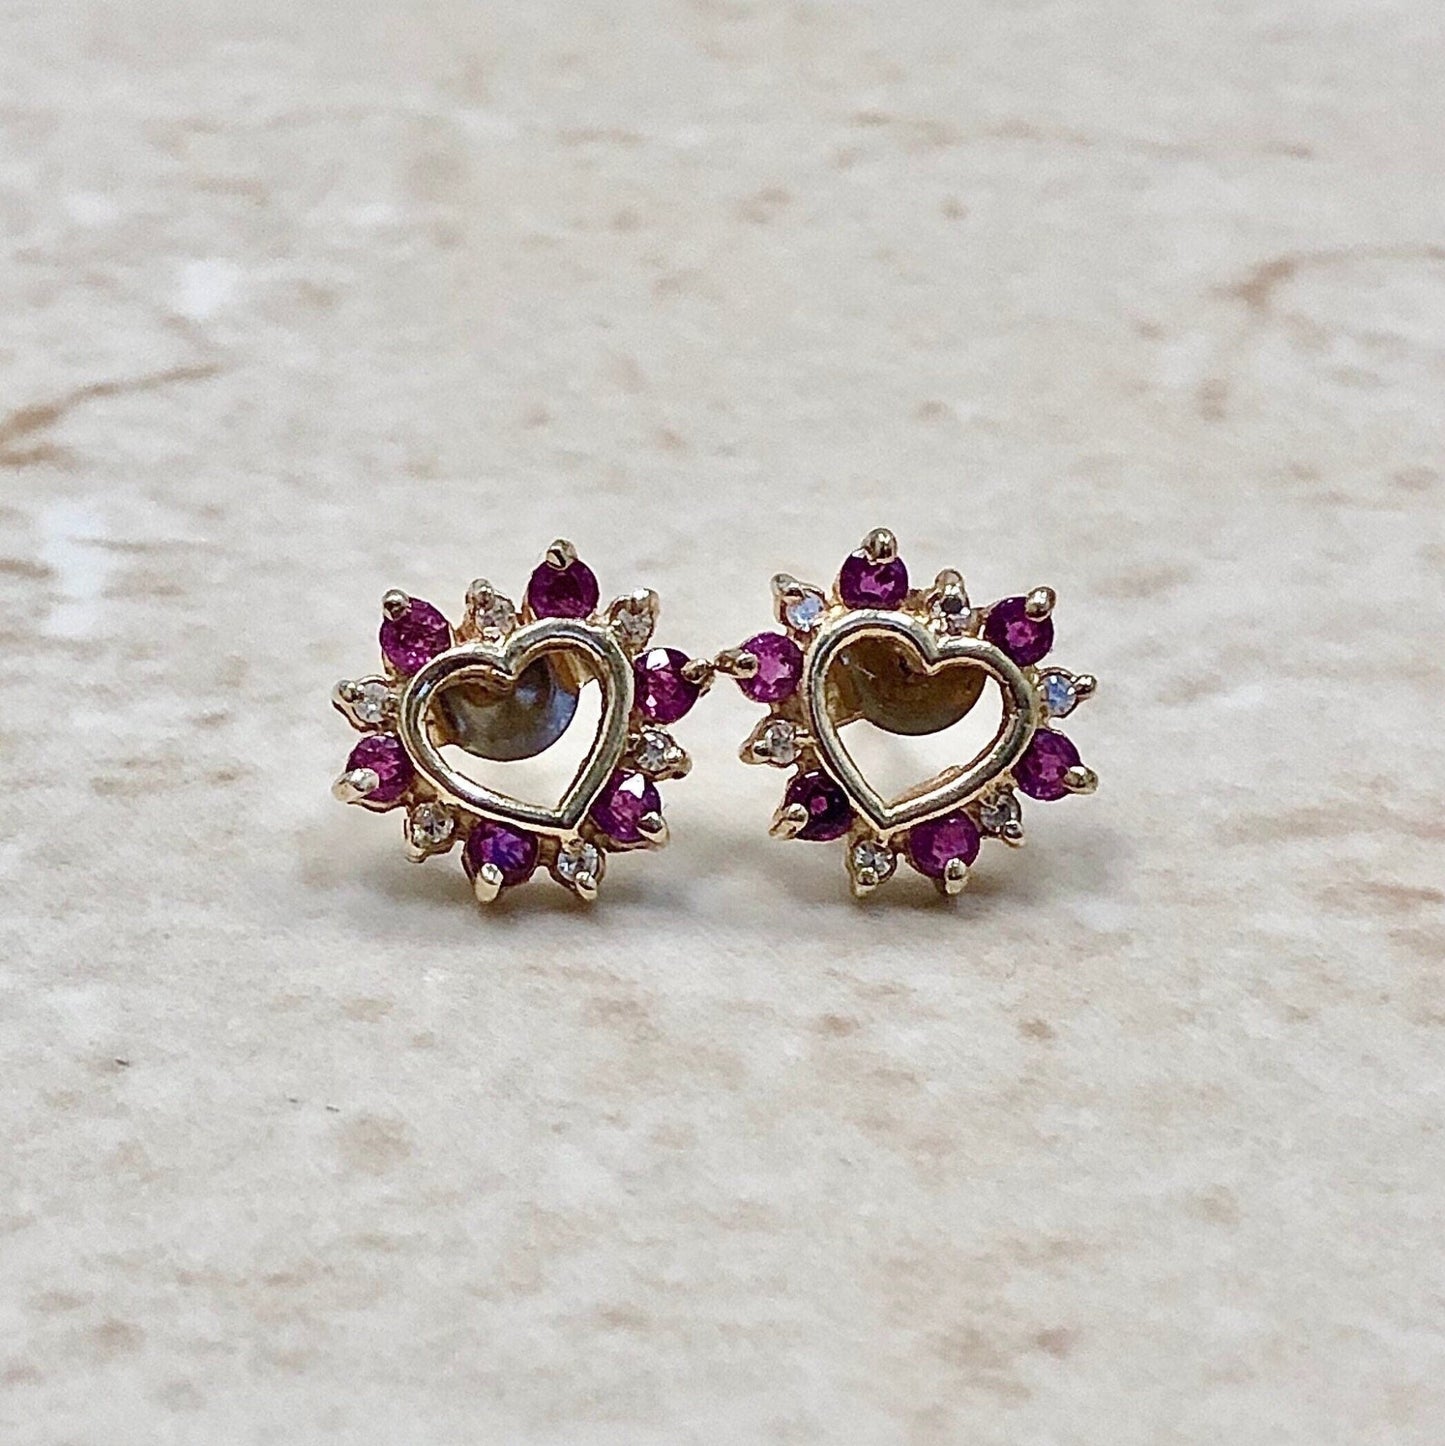 10K Natural Ruby & Diamond Heart Stud Earrings - Yellow Gold Ruby Earrings - July Birthstone - Birthday Gift - Valentine’s Day Gifts For Her